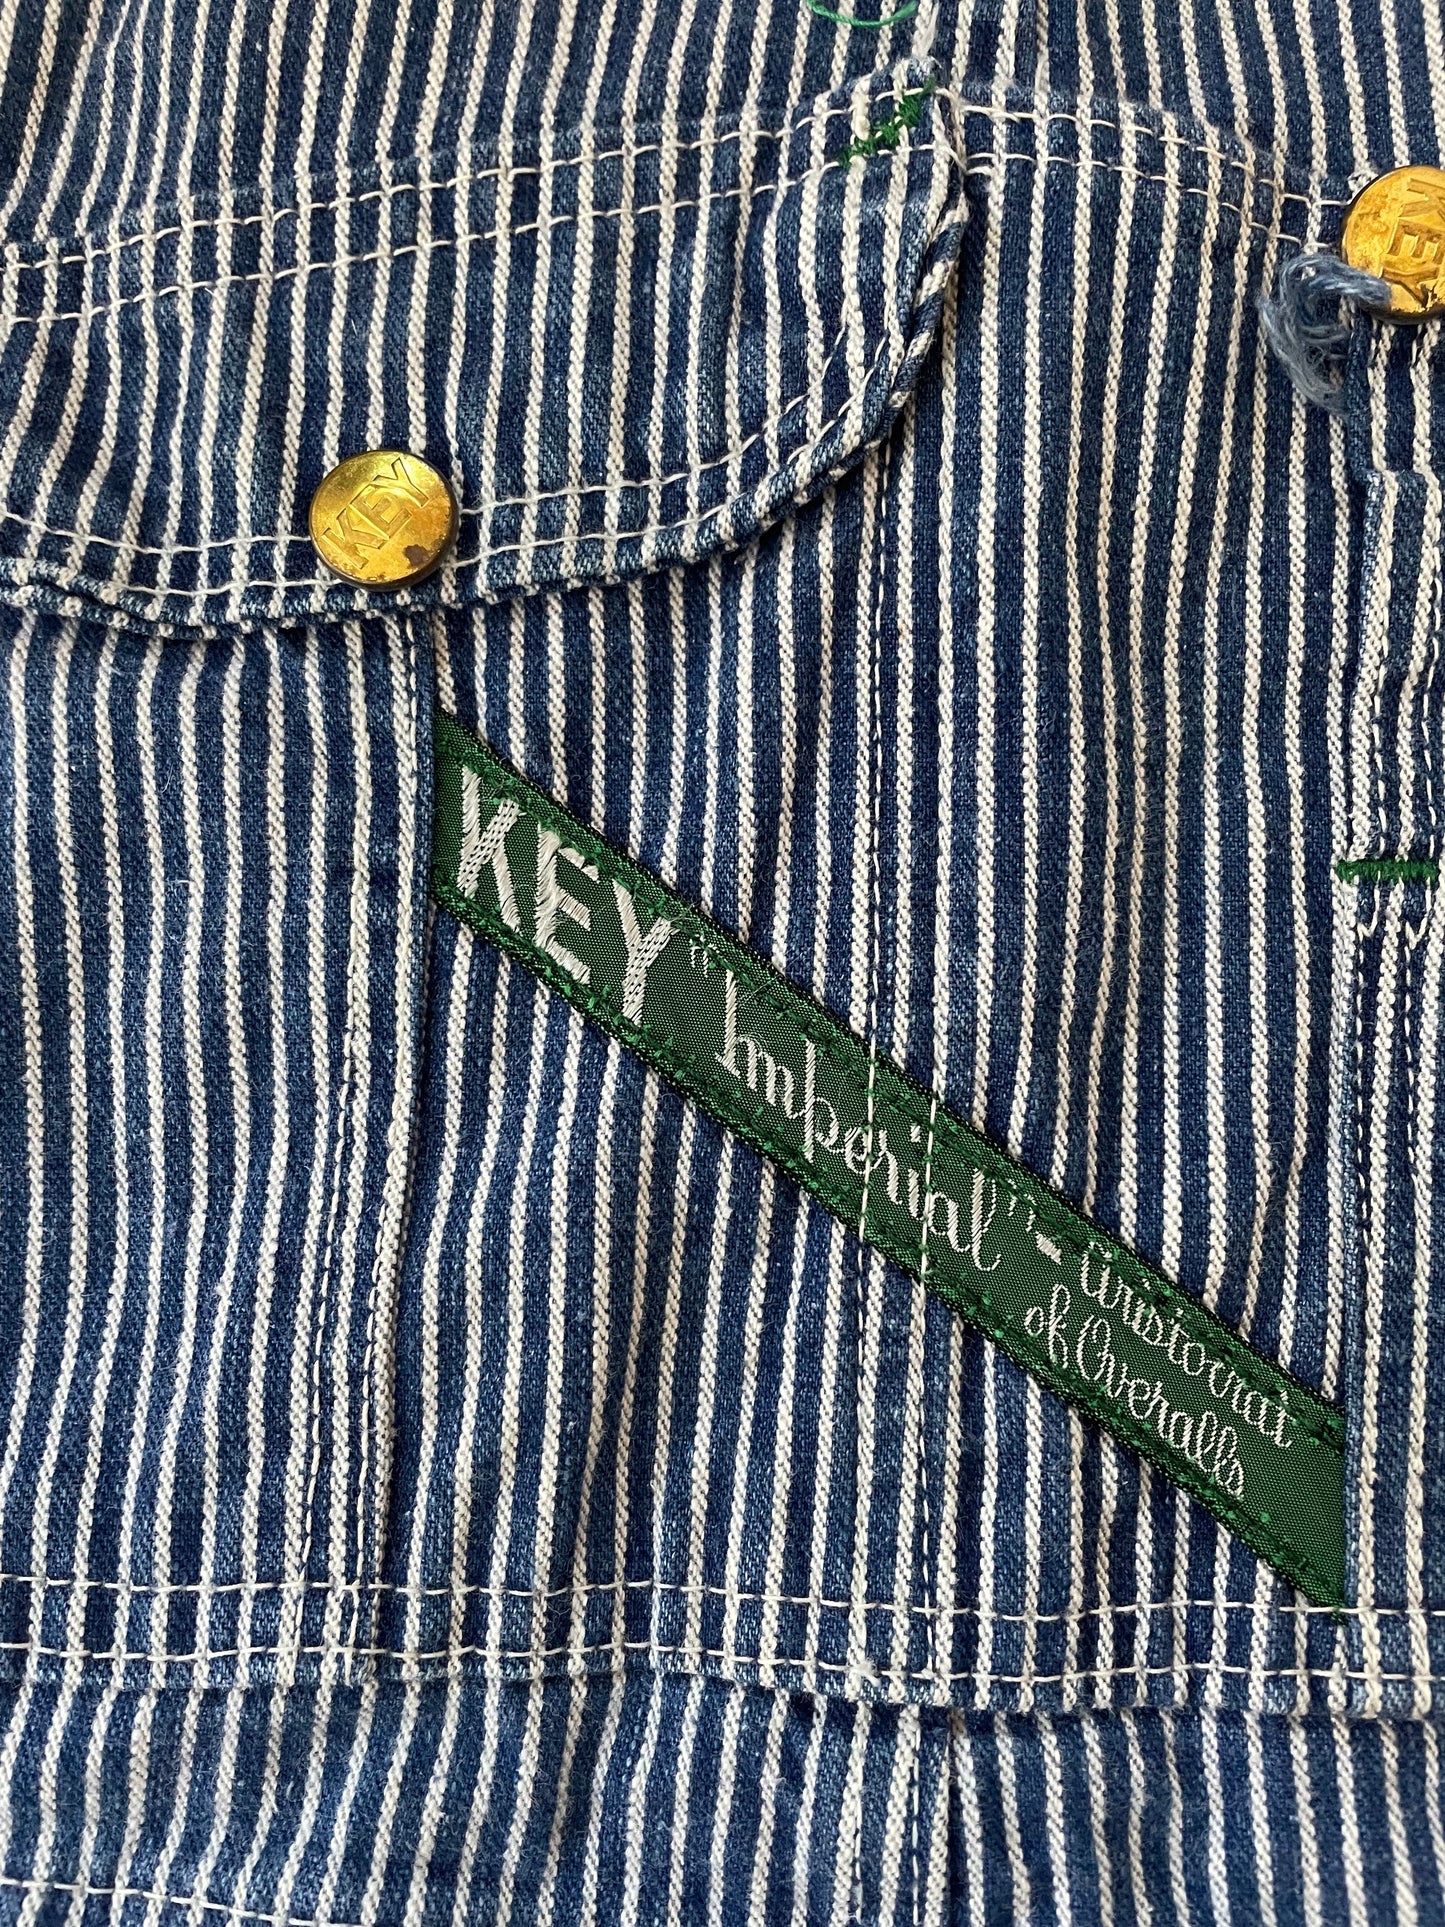 70s/80s Key Imperial Hickory Stripe Overalls